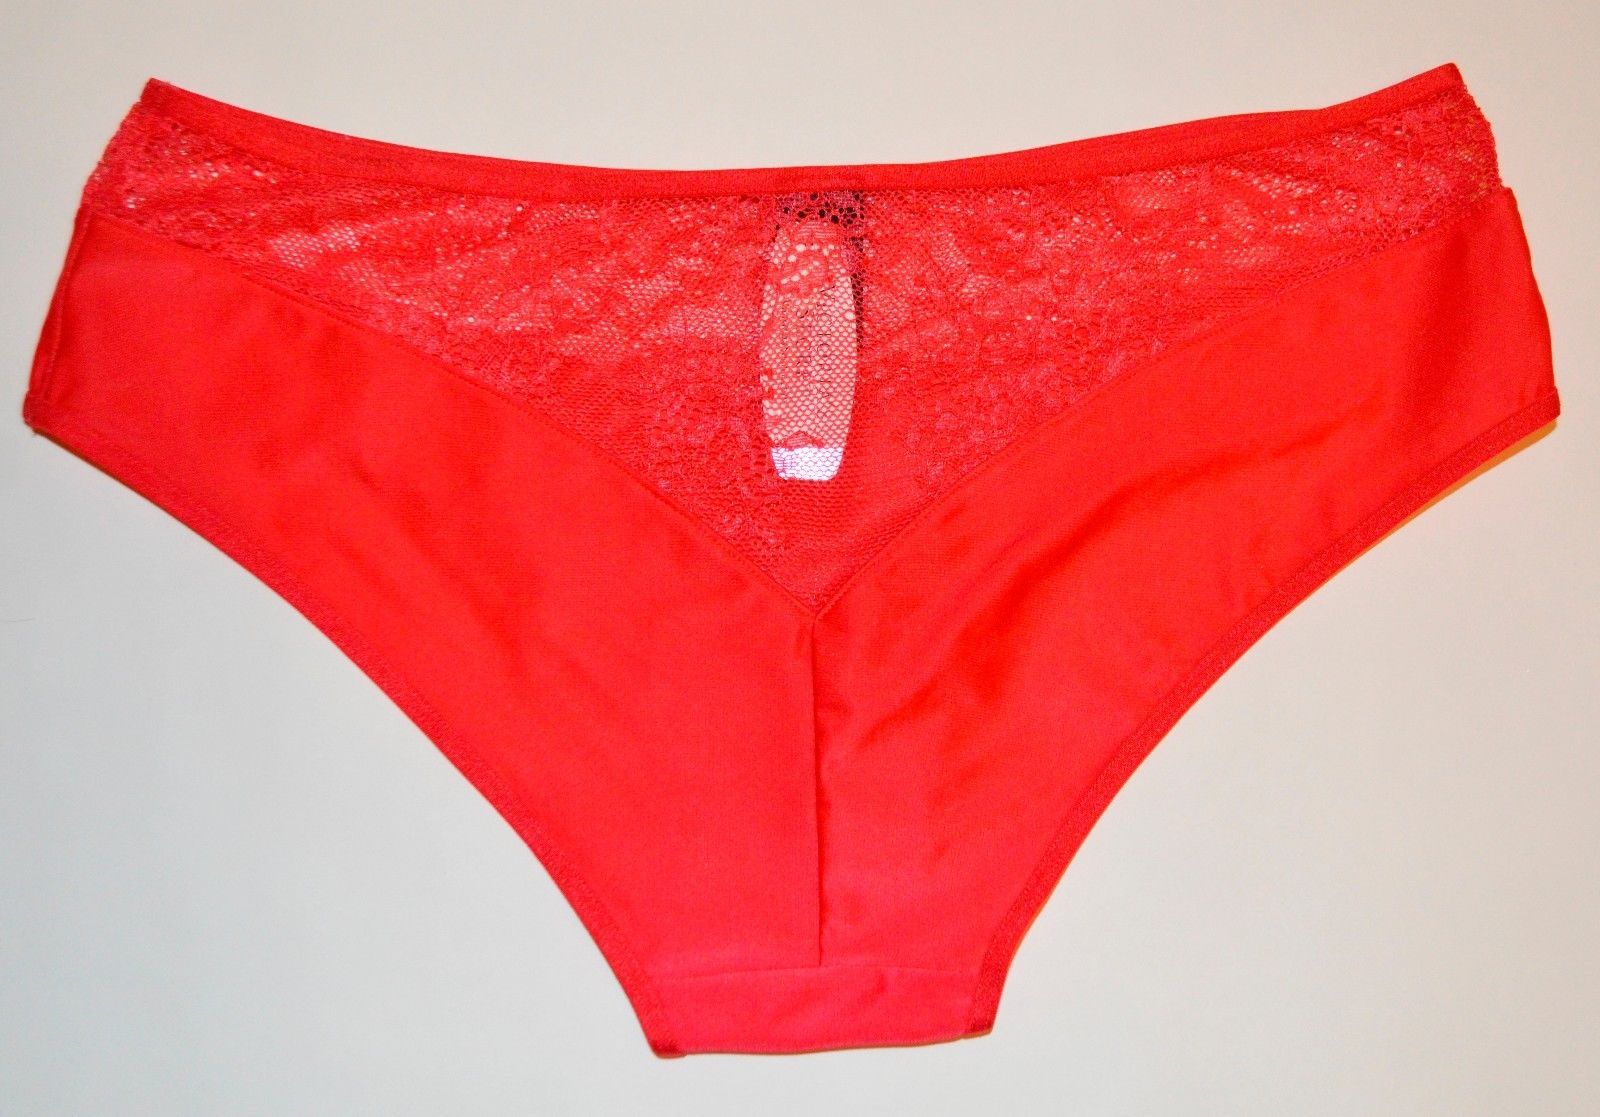 NEW Victoria's Secret Hiphugger Panty in Bright Cherry with Lace. Small ...